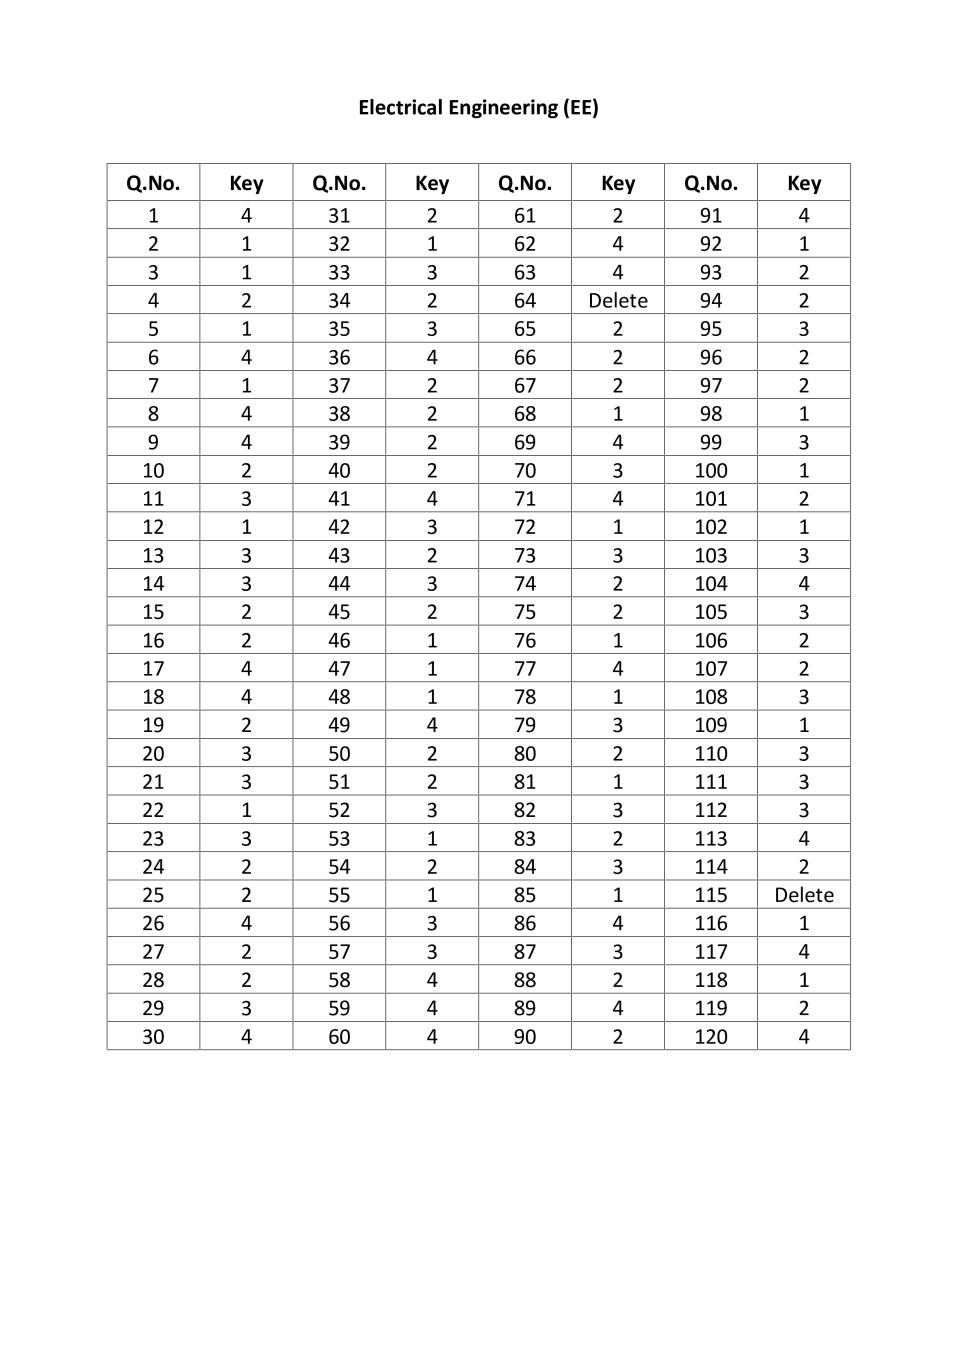 TS-PGECET 2017 Answer Key for EE - Page 1